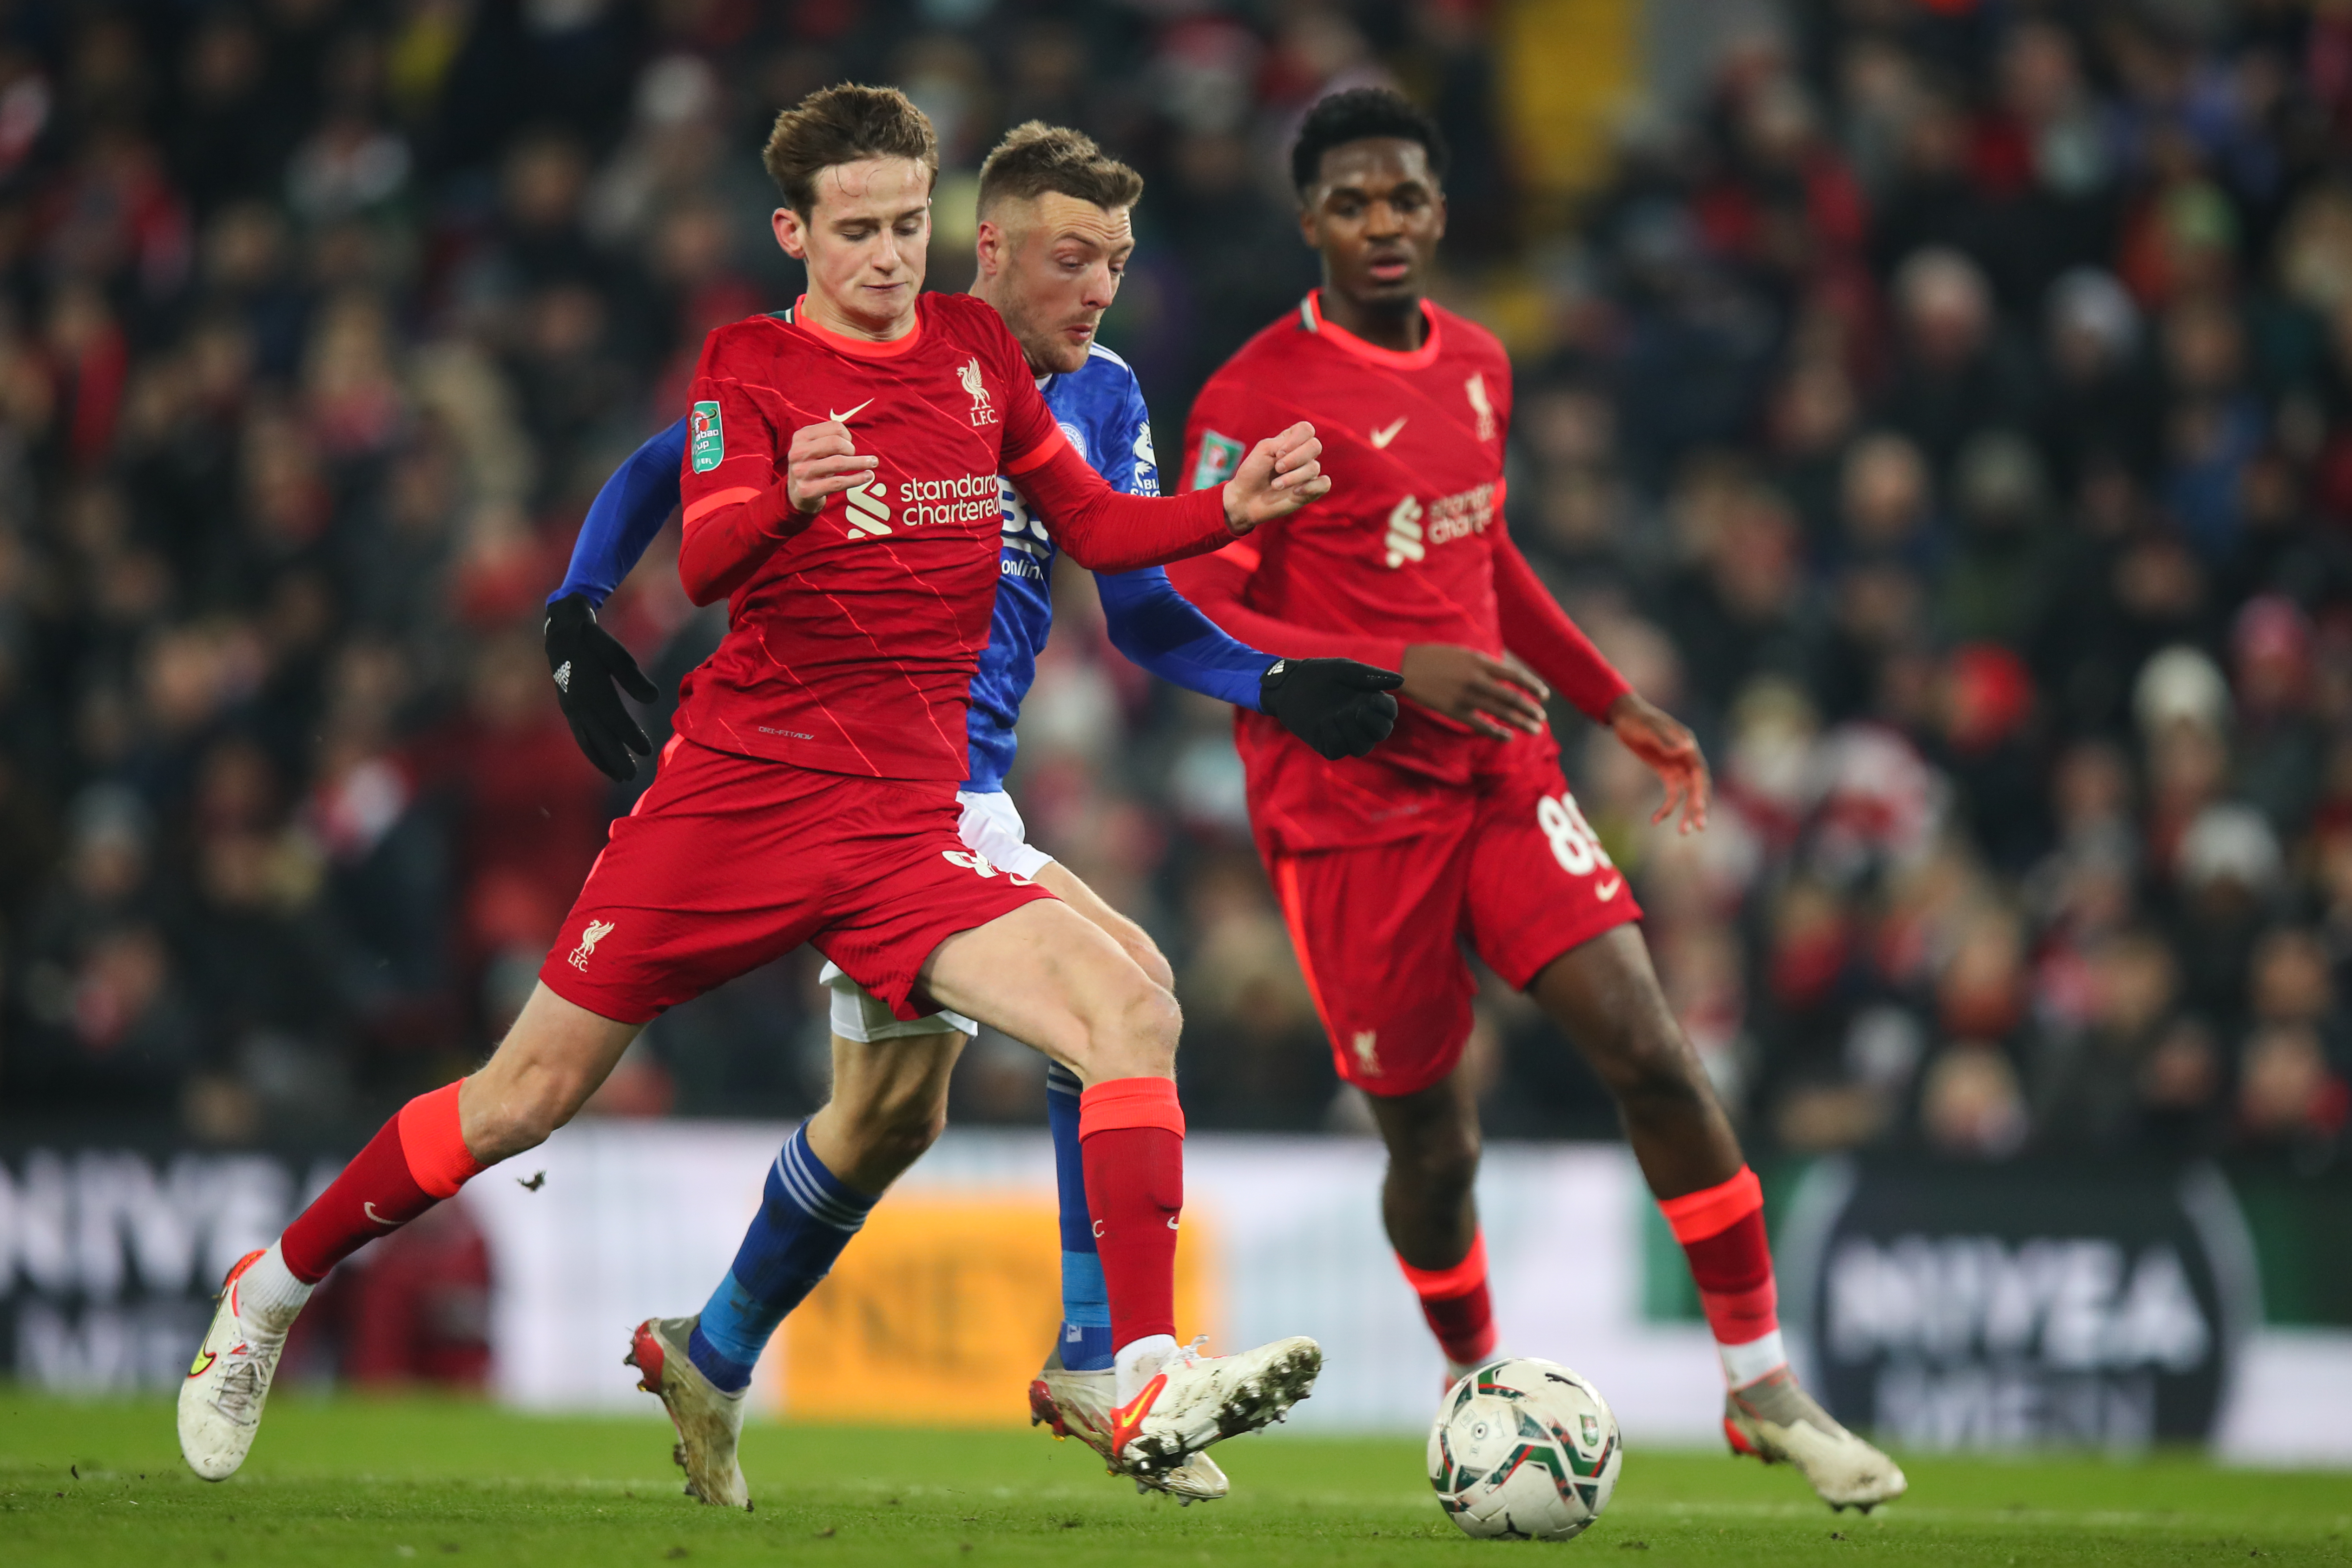 Tyler Morton of Liverpool and Jamie Vardy of Leicester City during the Carabao Cup Quarter Final match between Liverpool and Leicester City at Anfield on December 22, 2021 in Liverpool, England.